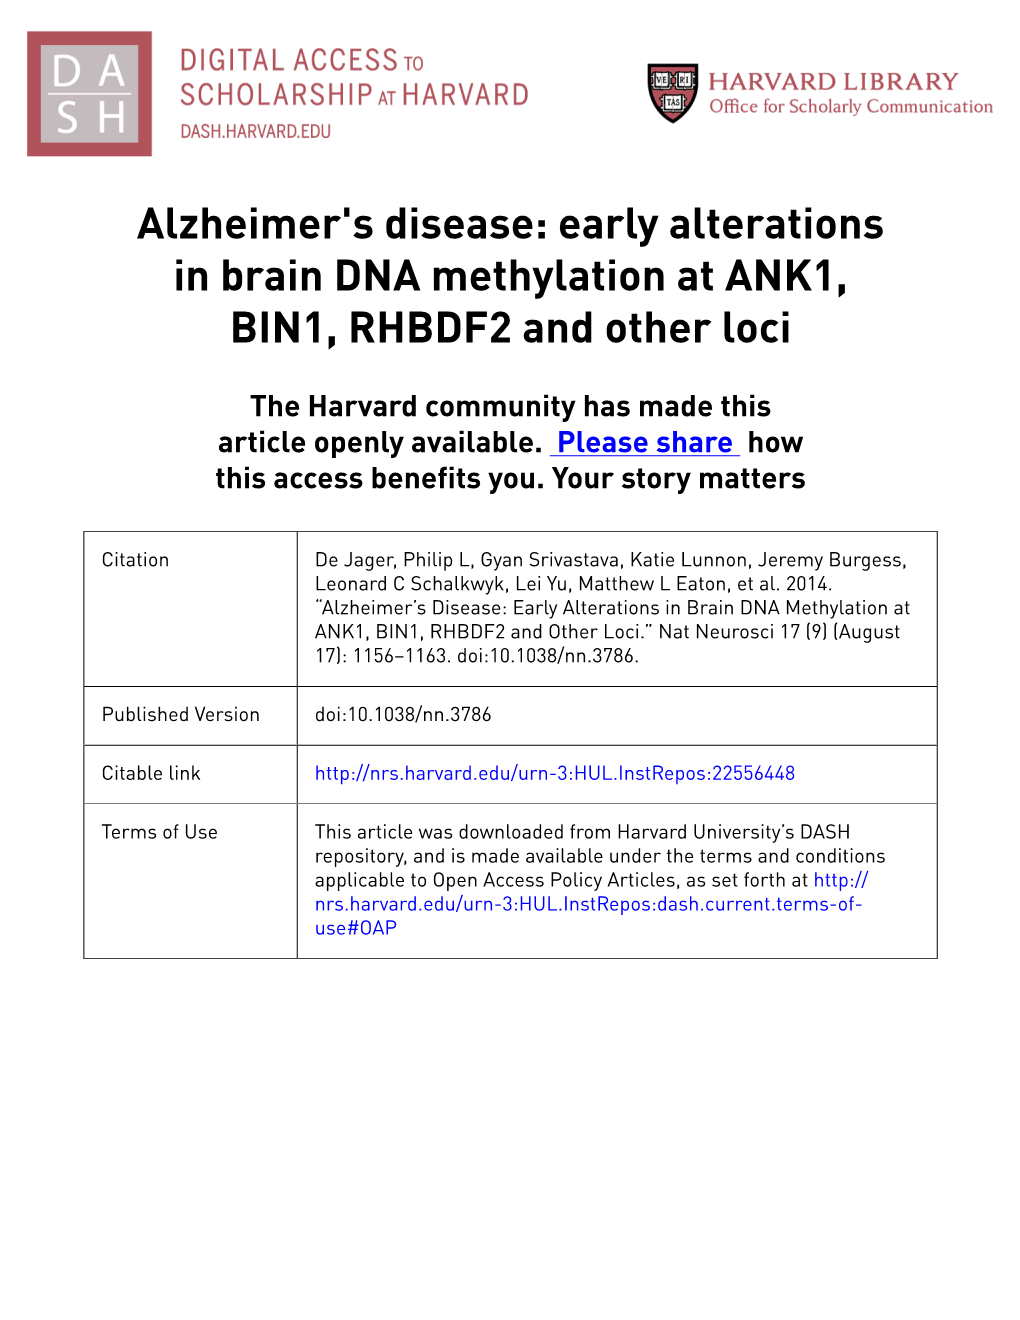 Alzheimer's Disease: Early Alterations in Brain DNA Methylation at ANK1, BIN1, RHBDF2 and Other Loci